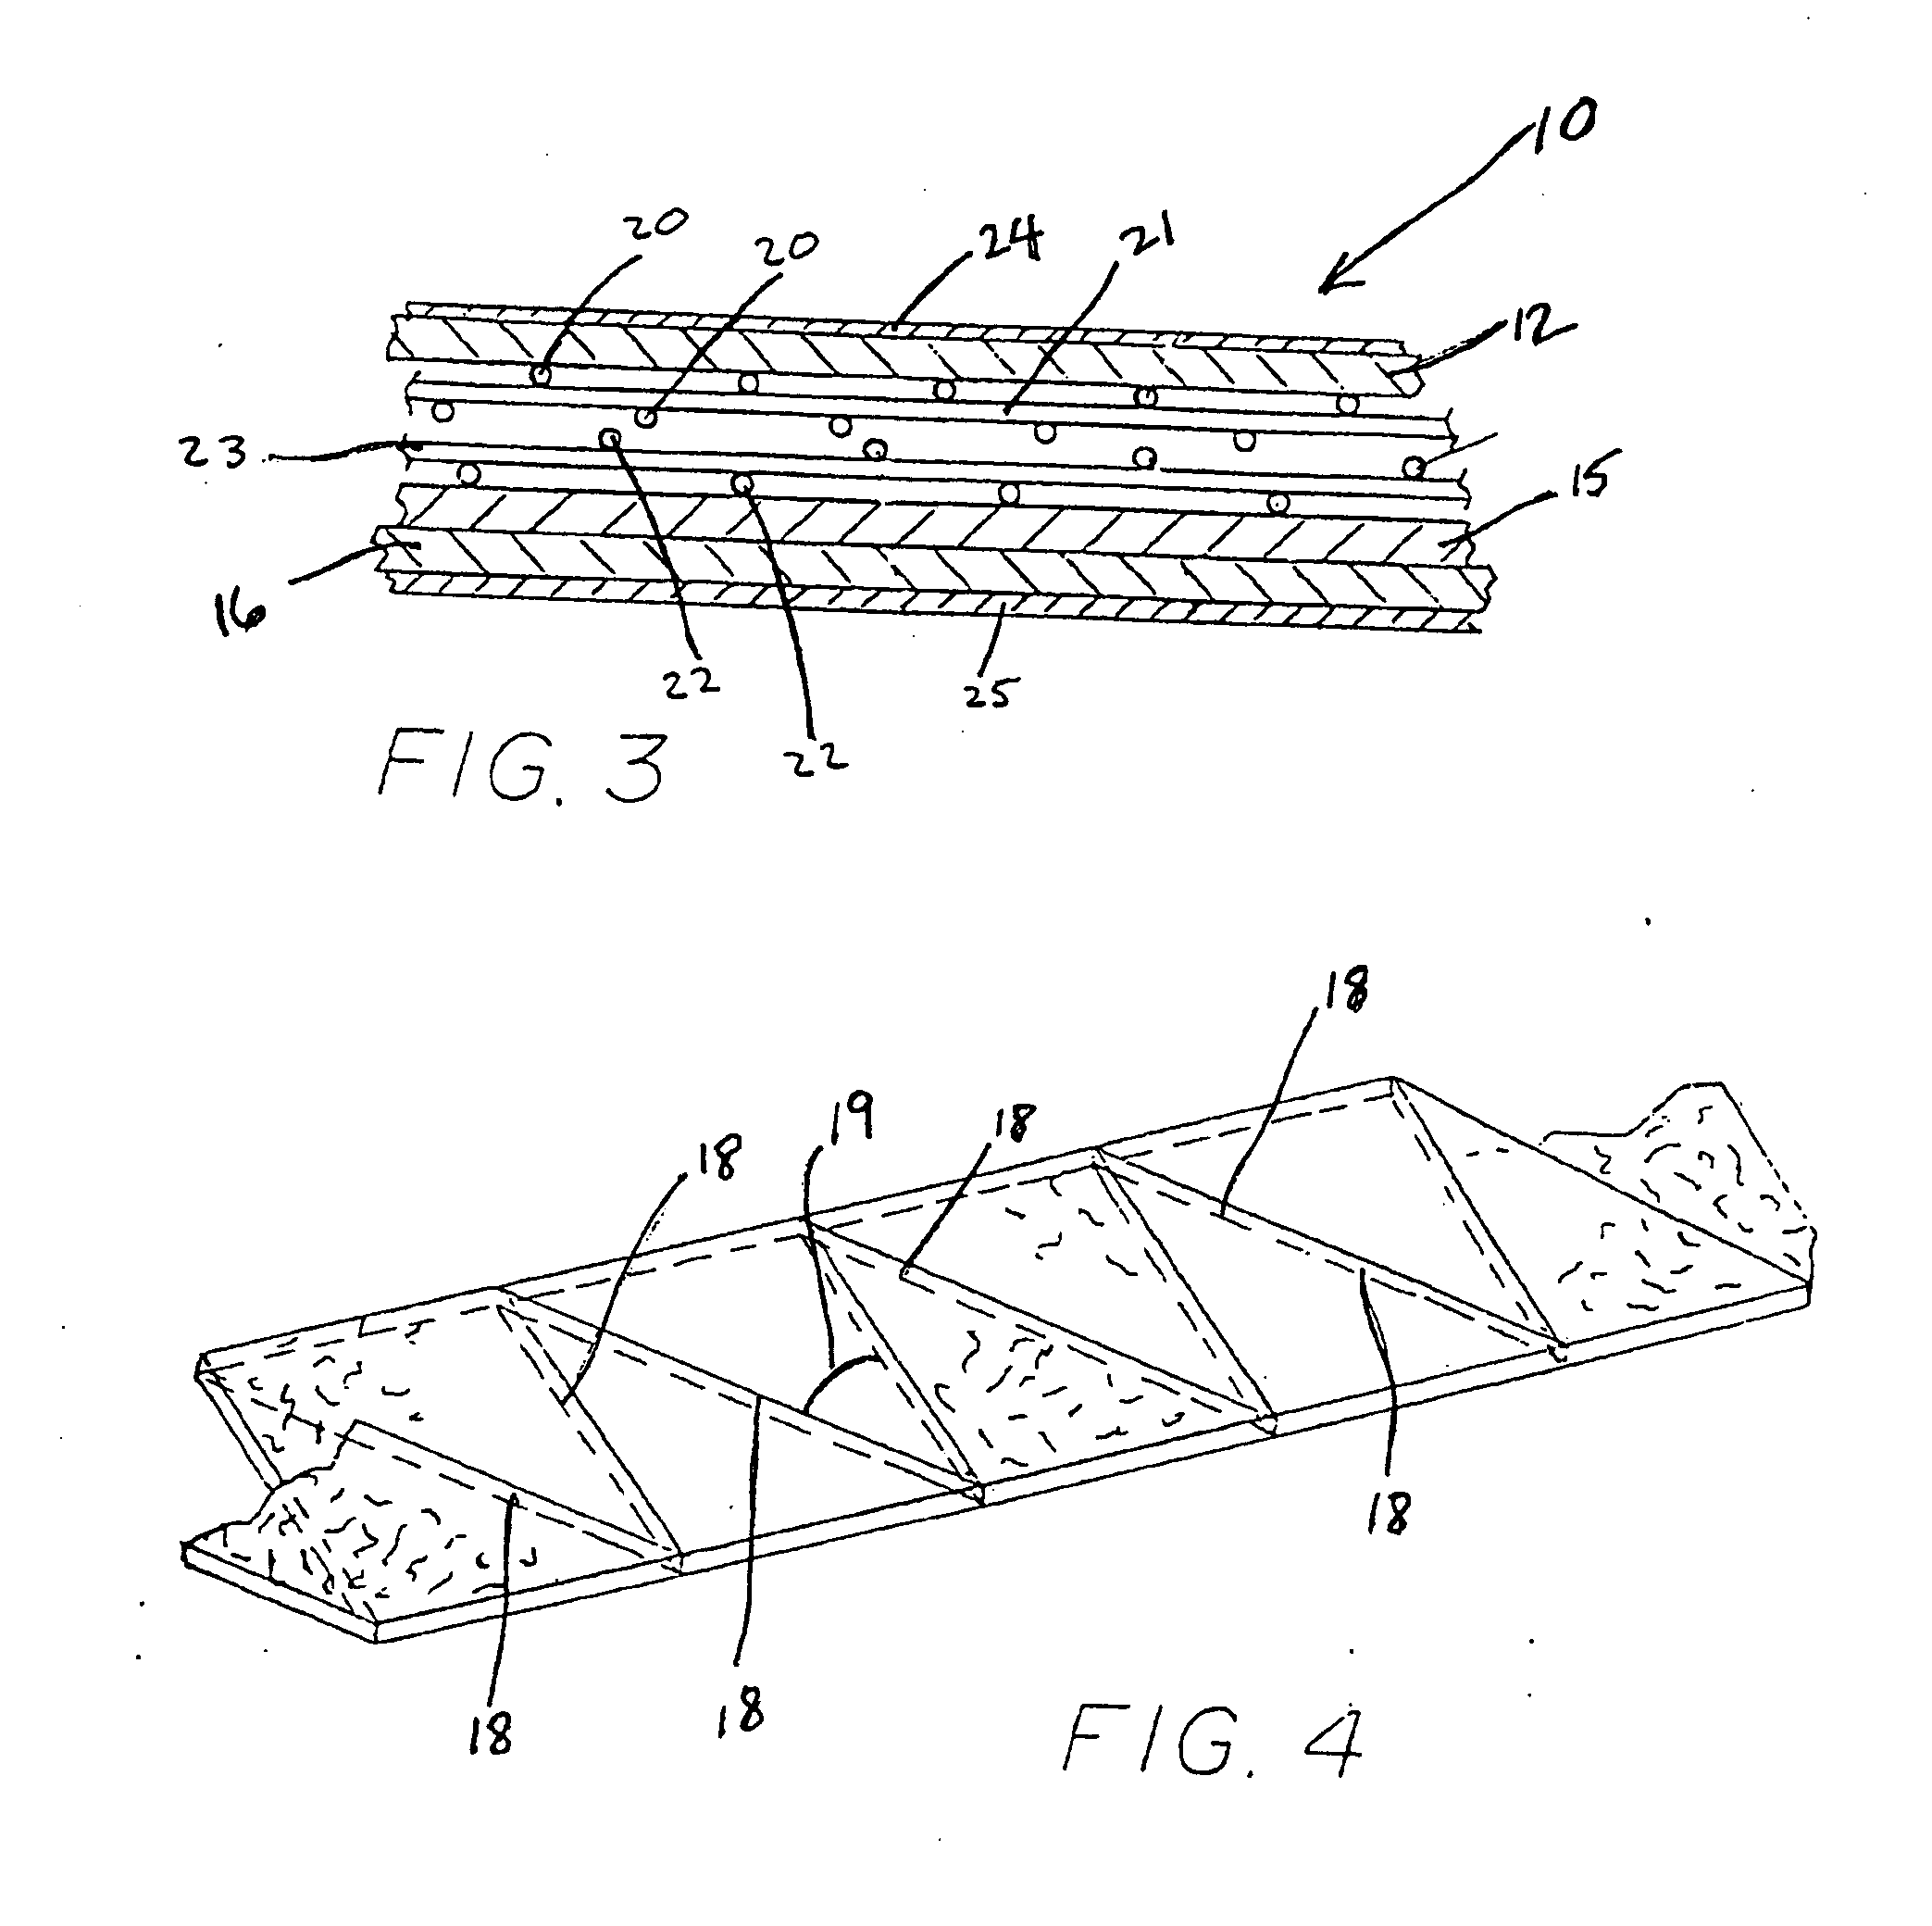 Reinforcement composite for a bituminous roofing membrane and method of making the composite